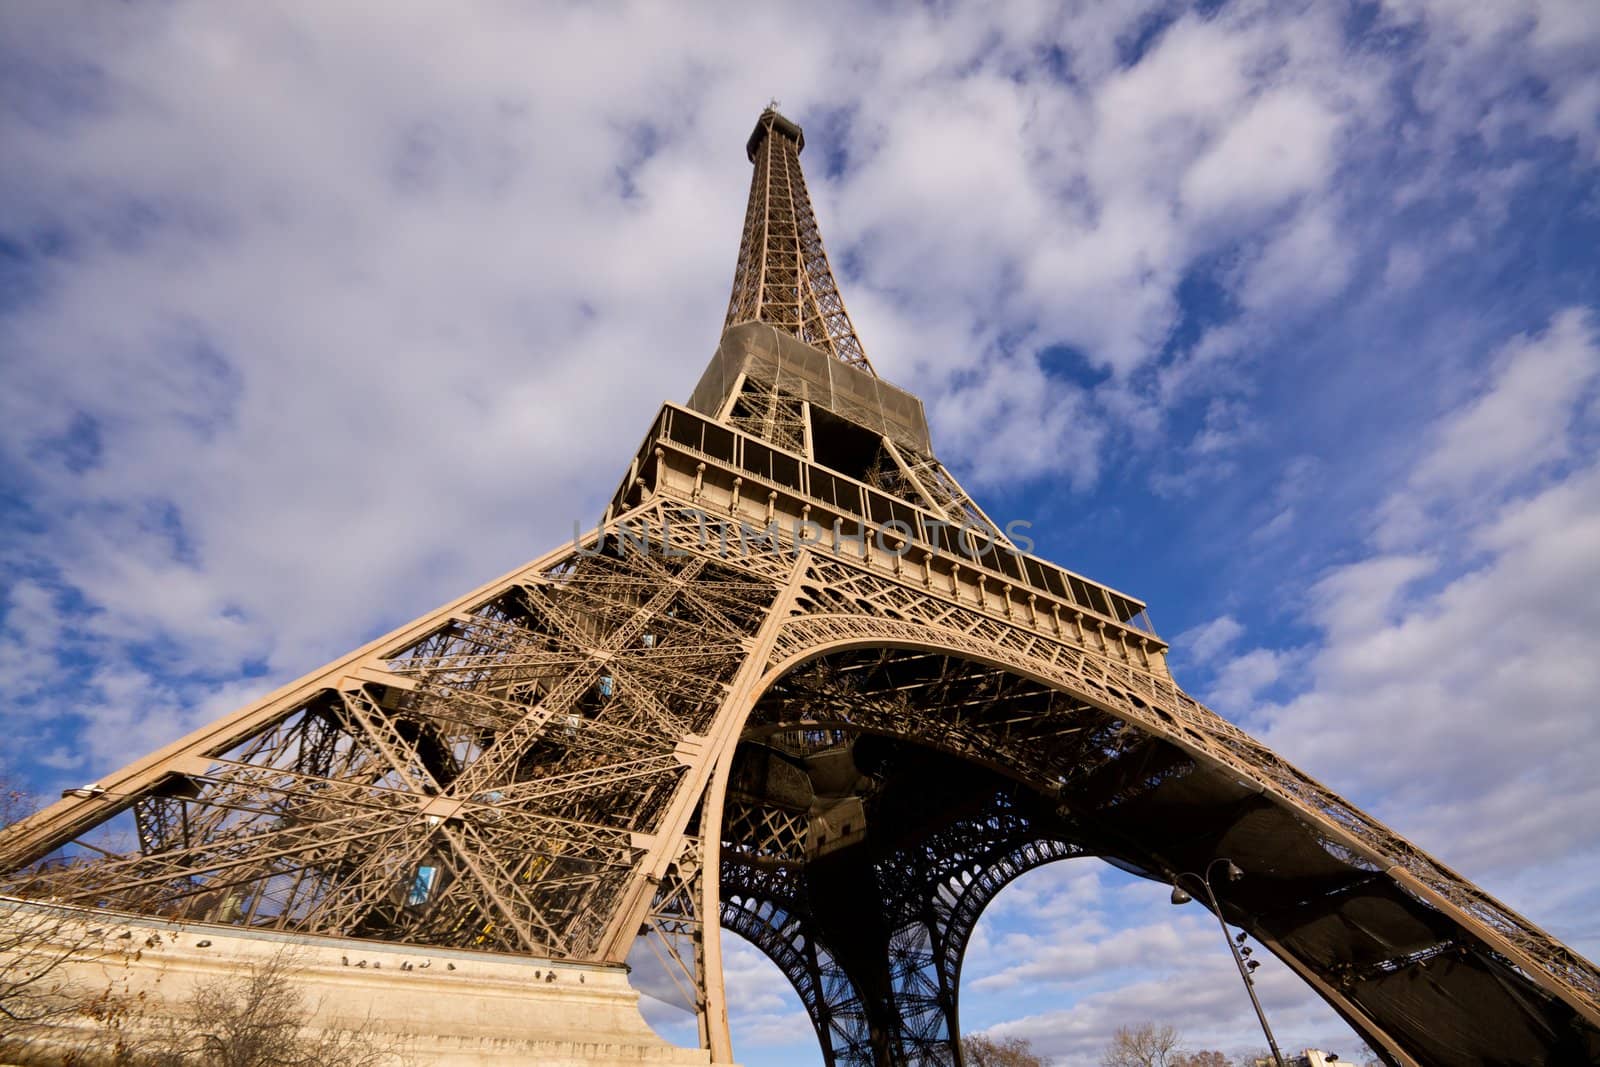 Eiffel Tower by Harvepino